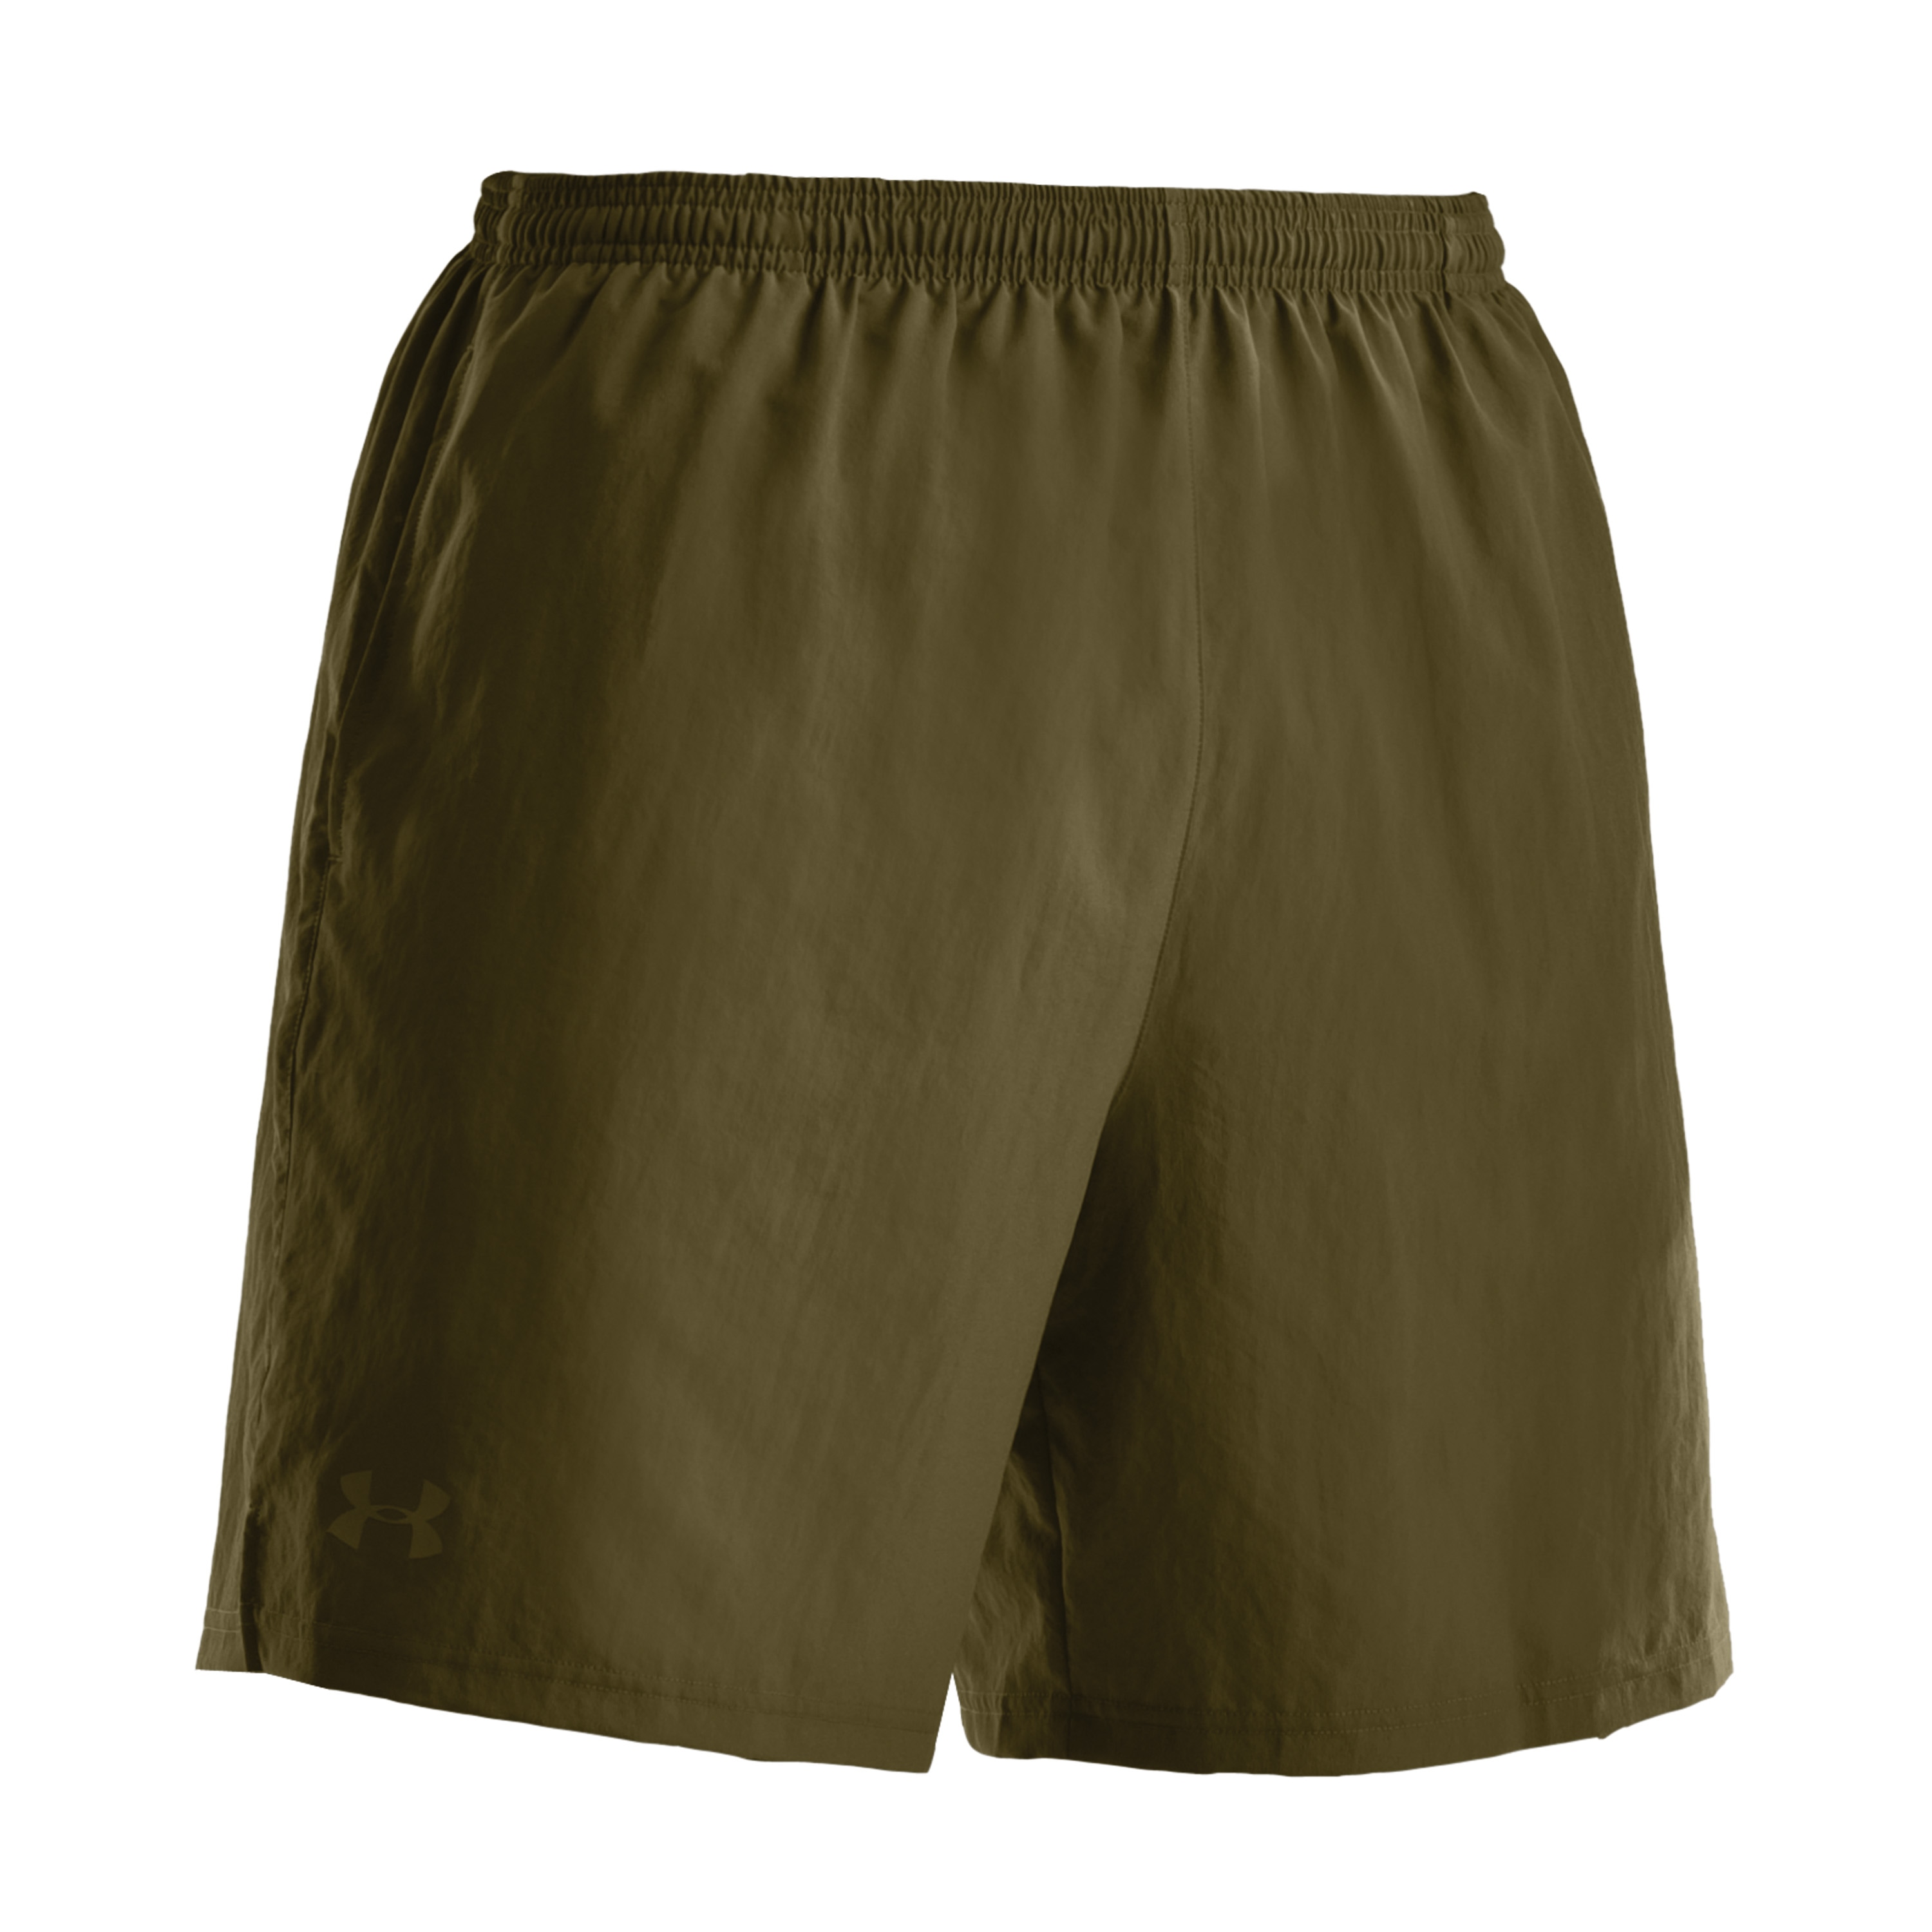 Under Armour Tactical Training Shorts olive | Under Armour Tactical